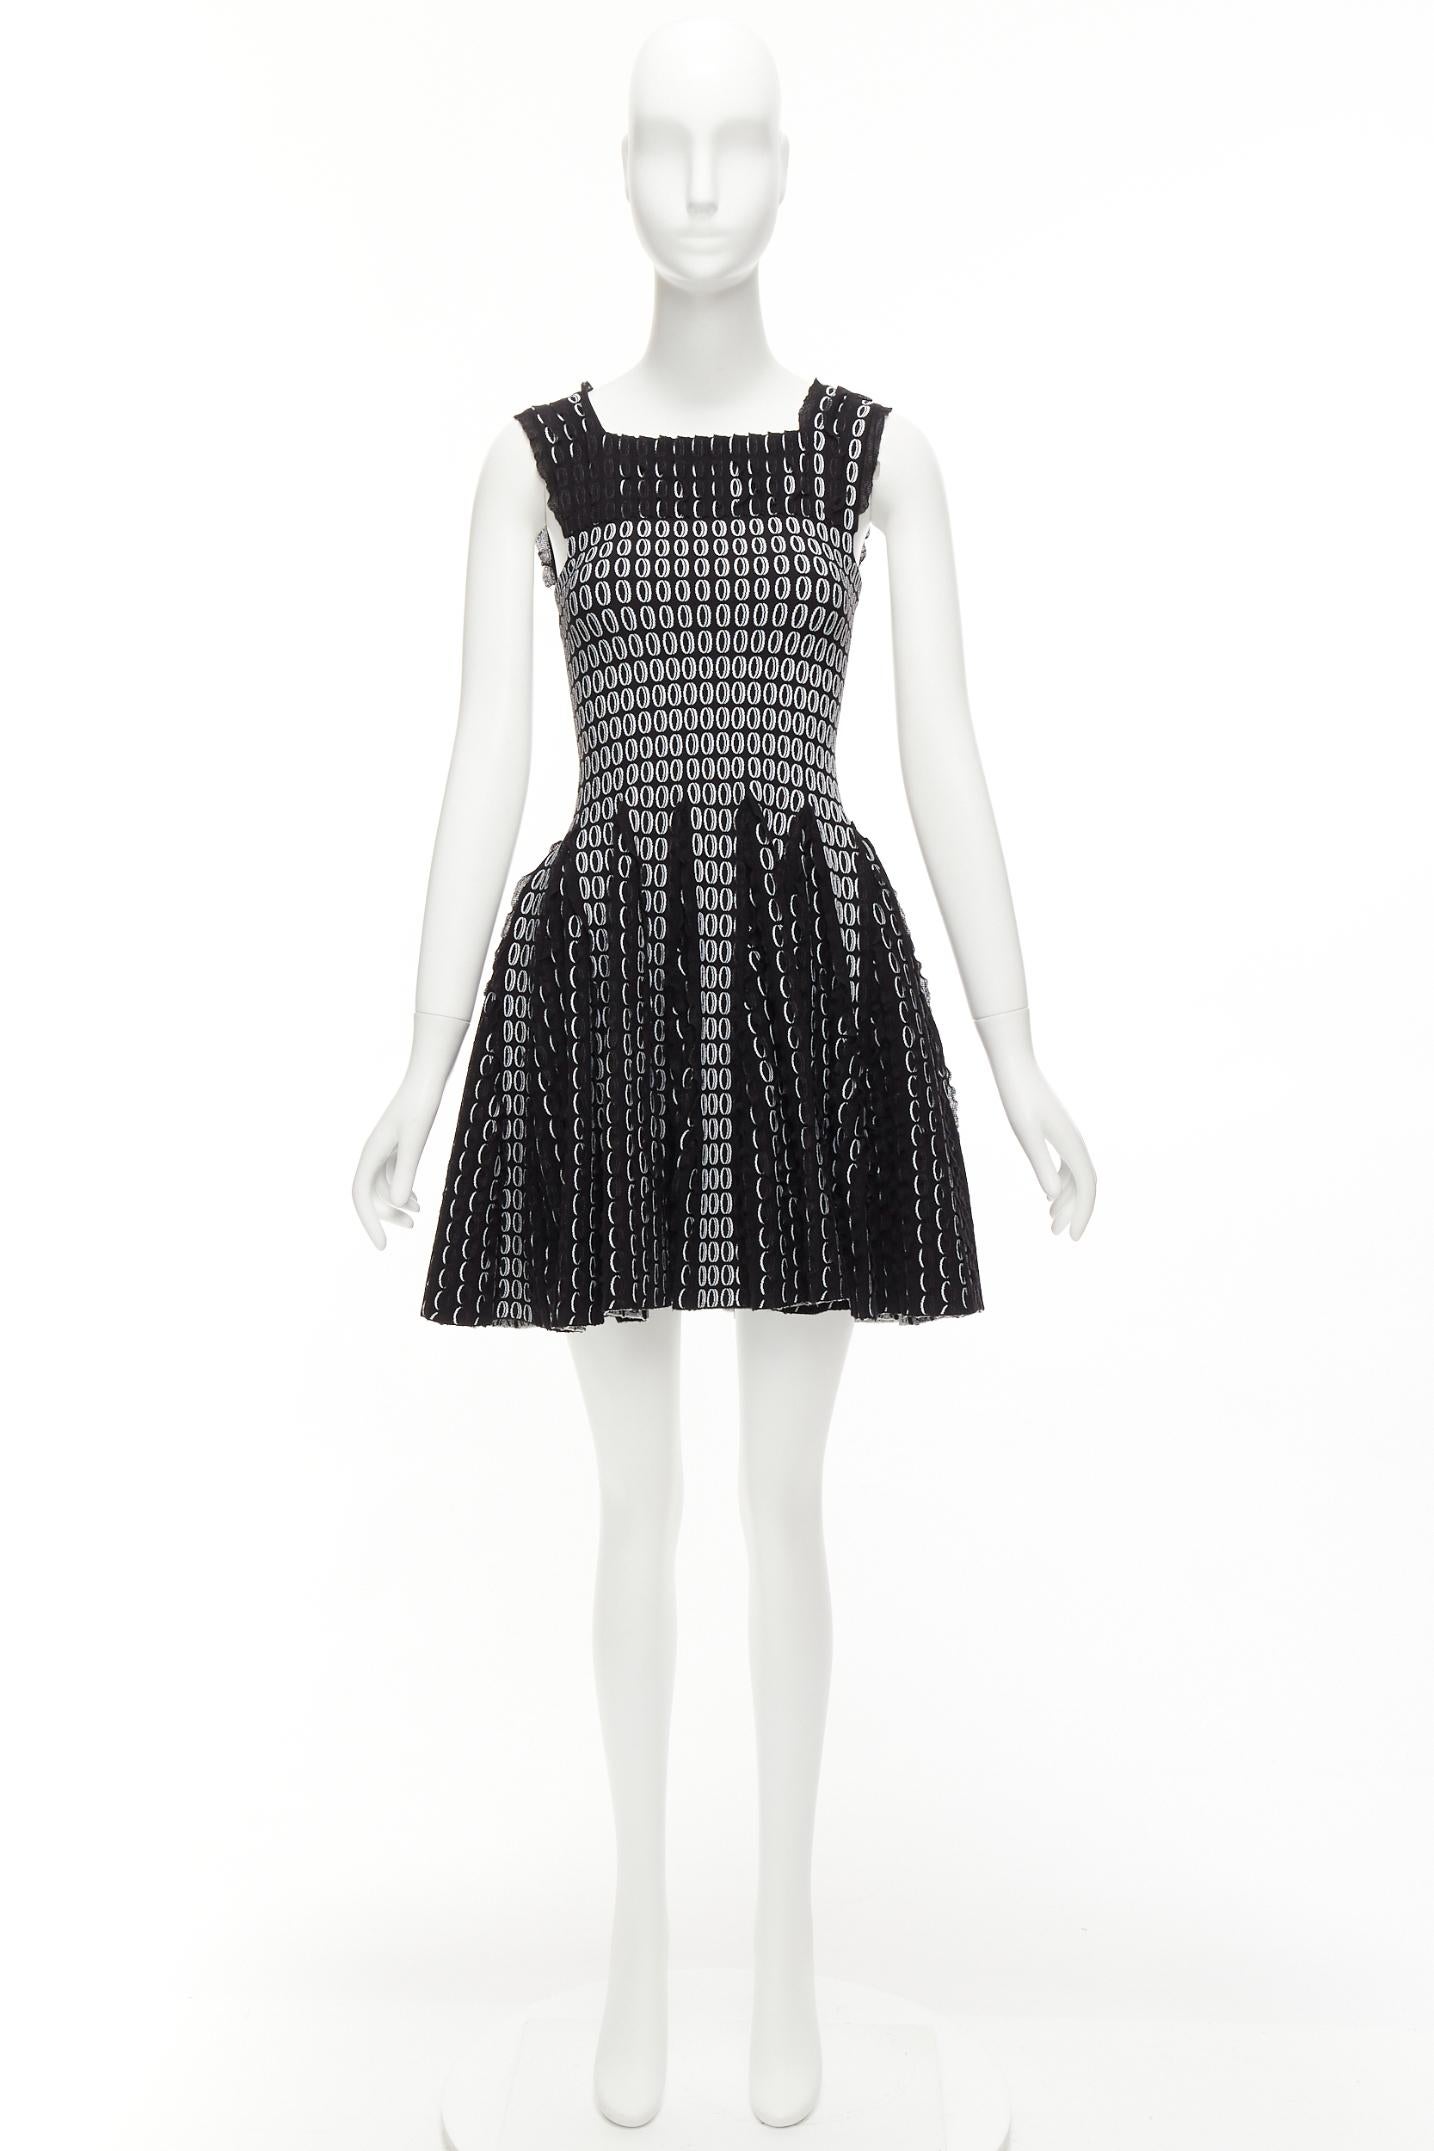 ALAIA black white scallop ruffle eyelet jacquard knitted fit flare dress FR36 S For Sale 5